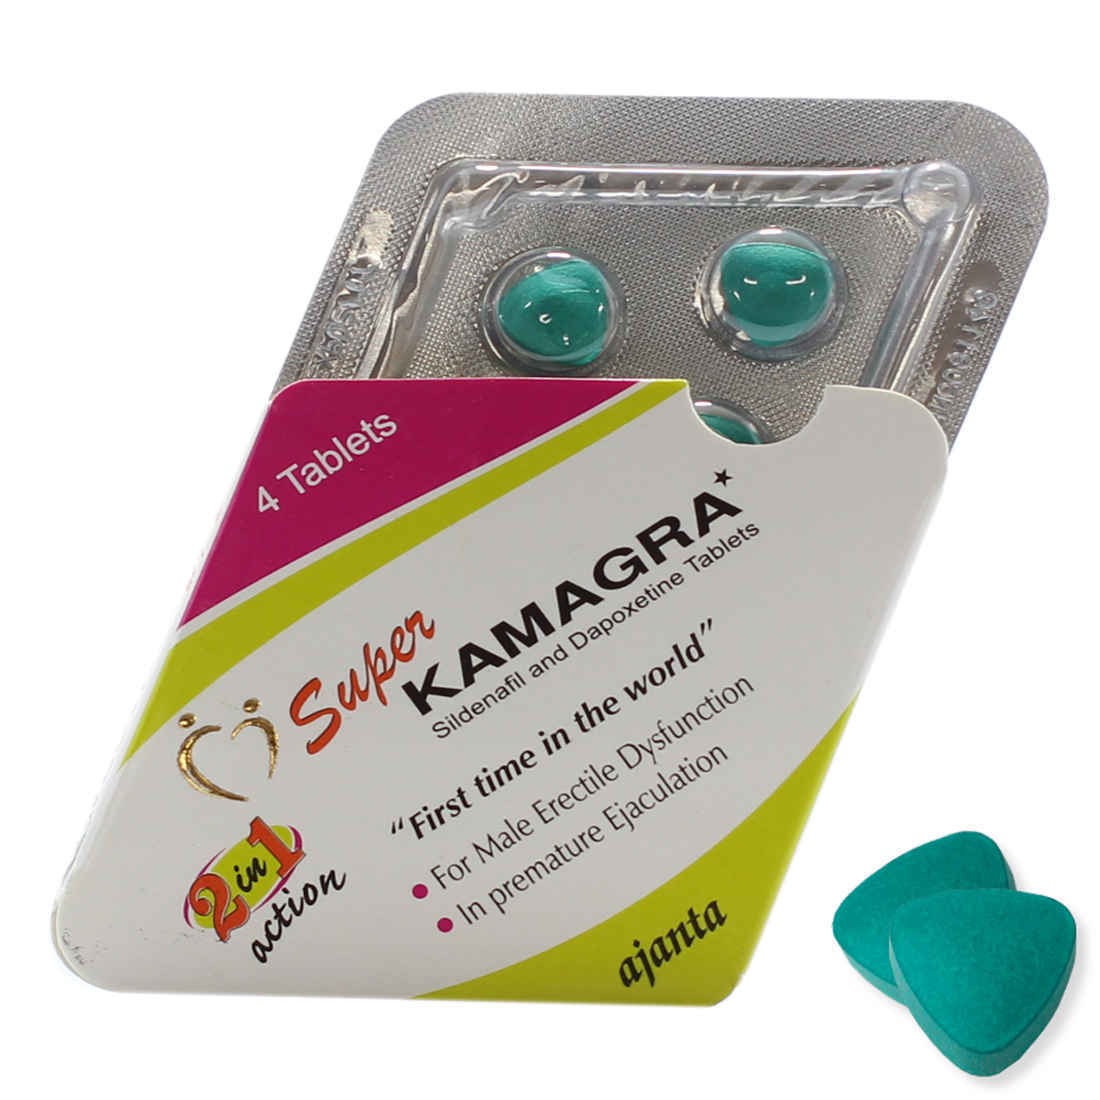 Kamagra 100mg Sex Pills 4 Film Coated Tablets Sildenafil From China Manufacturer Manufactory